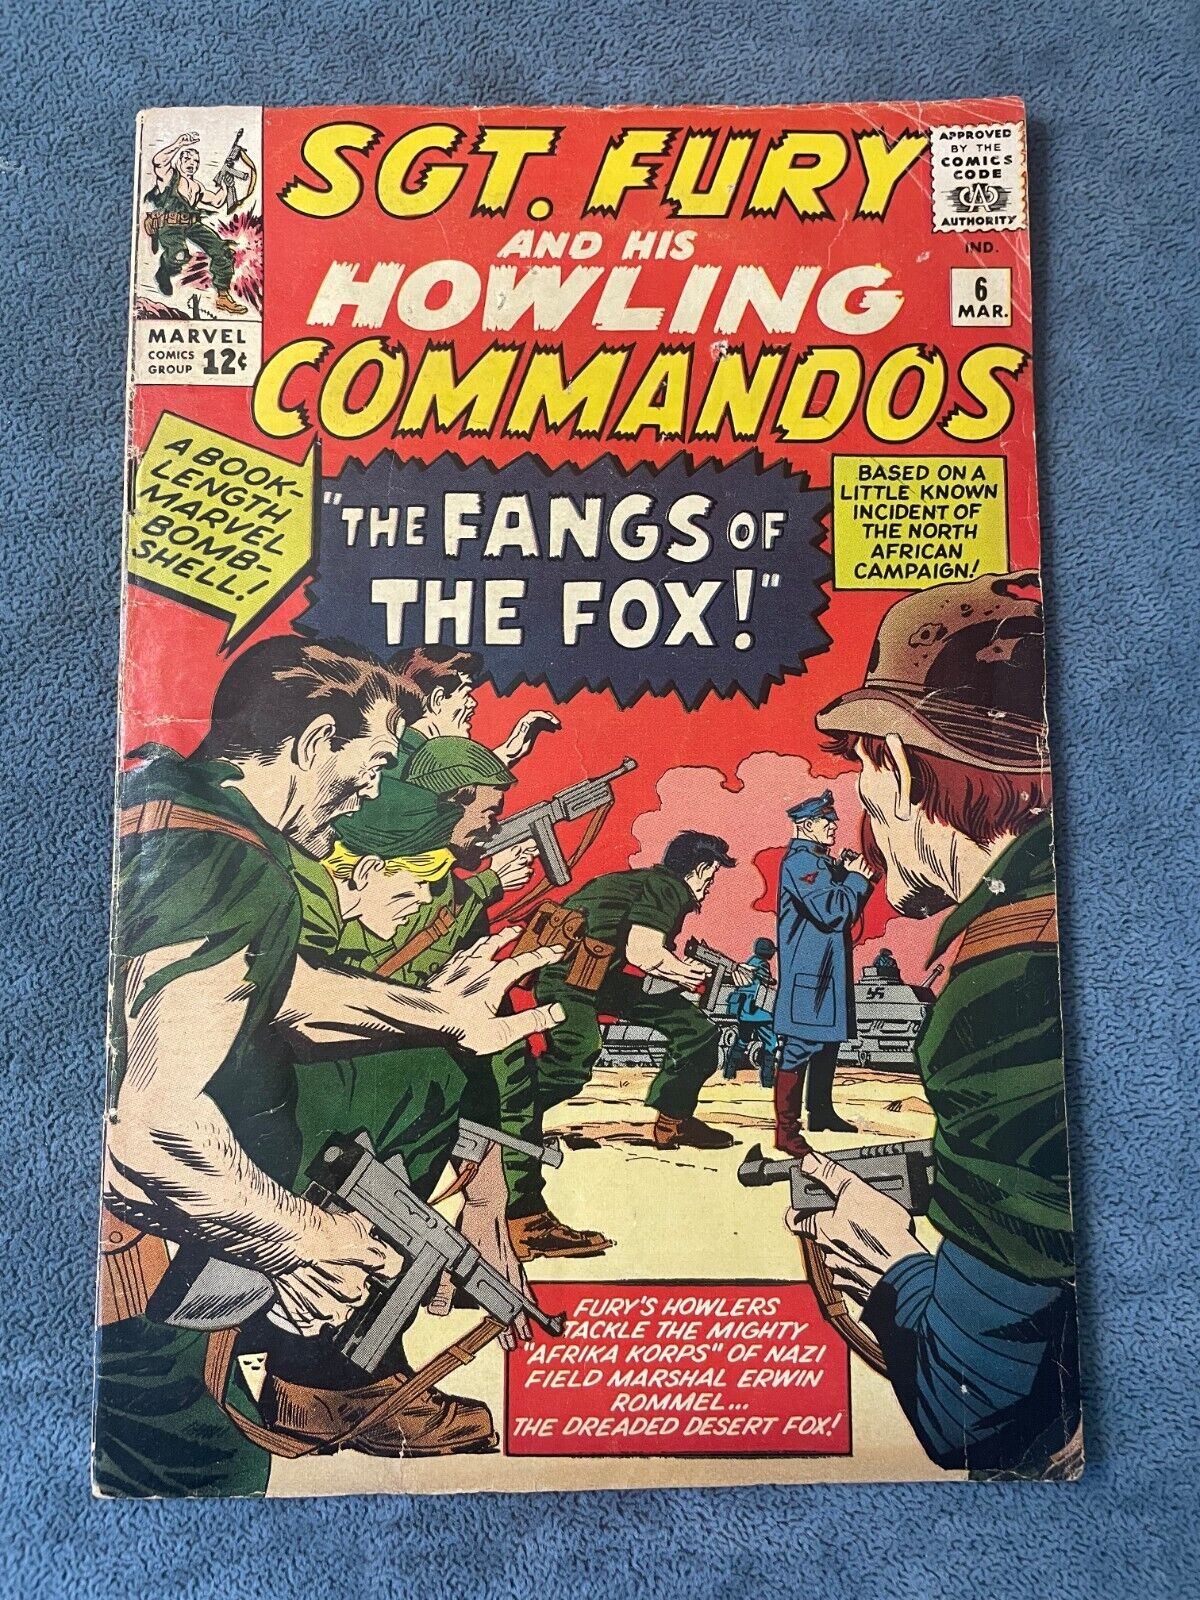 Sgt Fury and His Howling Commandos #6 1964 Marvel Comic Book Kirby VG+